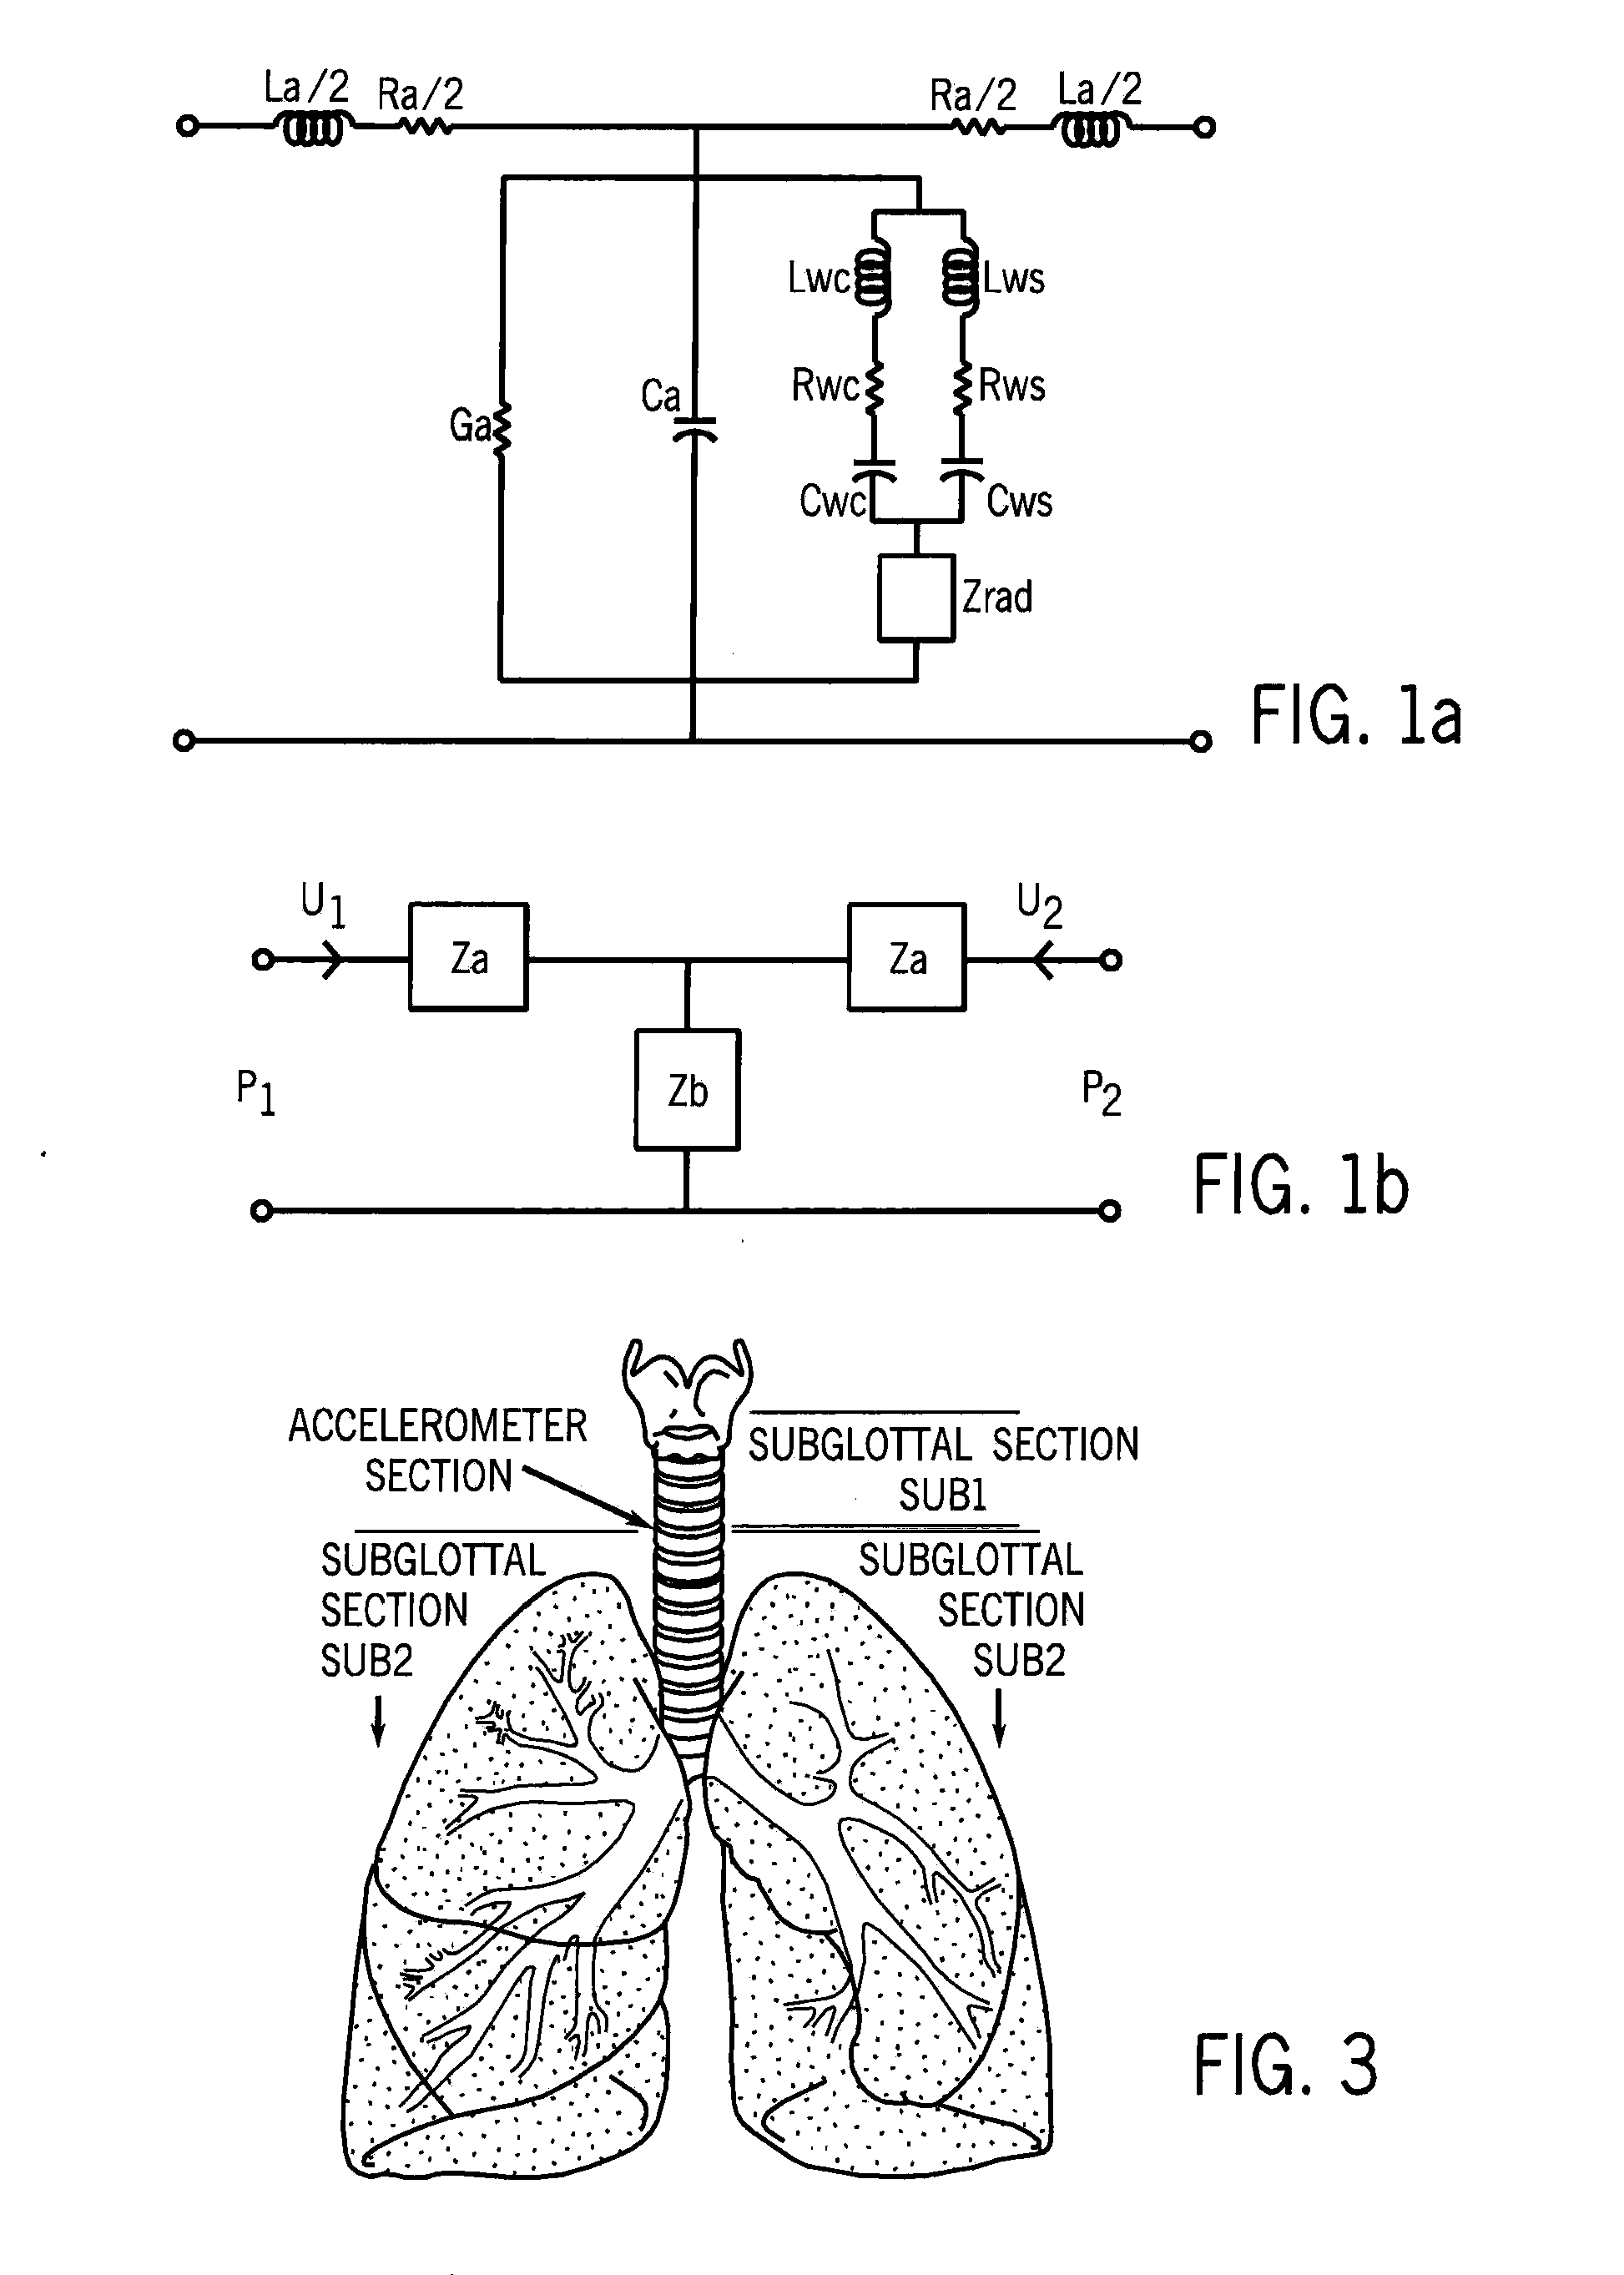 System and Methods for Evaluating Vocal Function Using an Impedance-Based Inverse Filtering of Neck Surface Acceleration